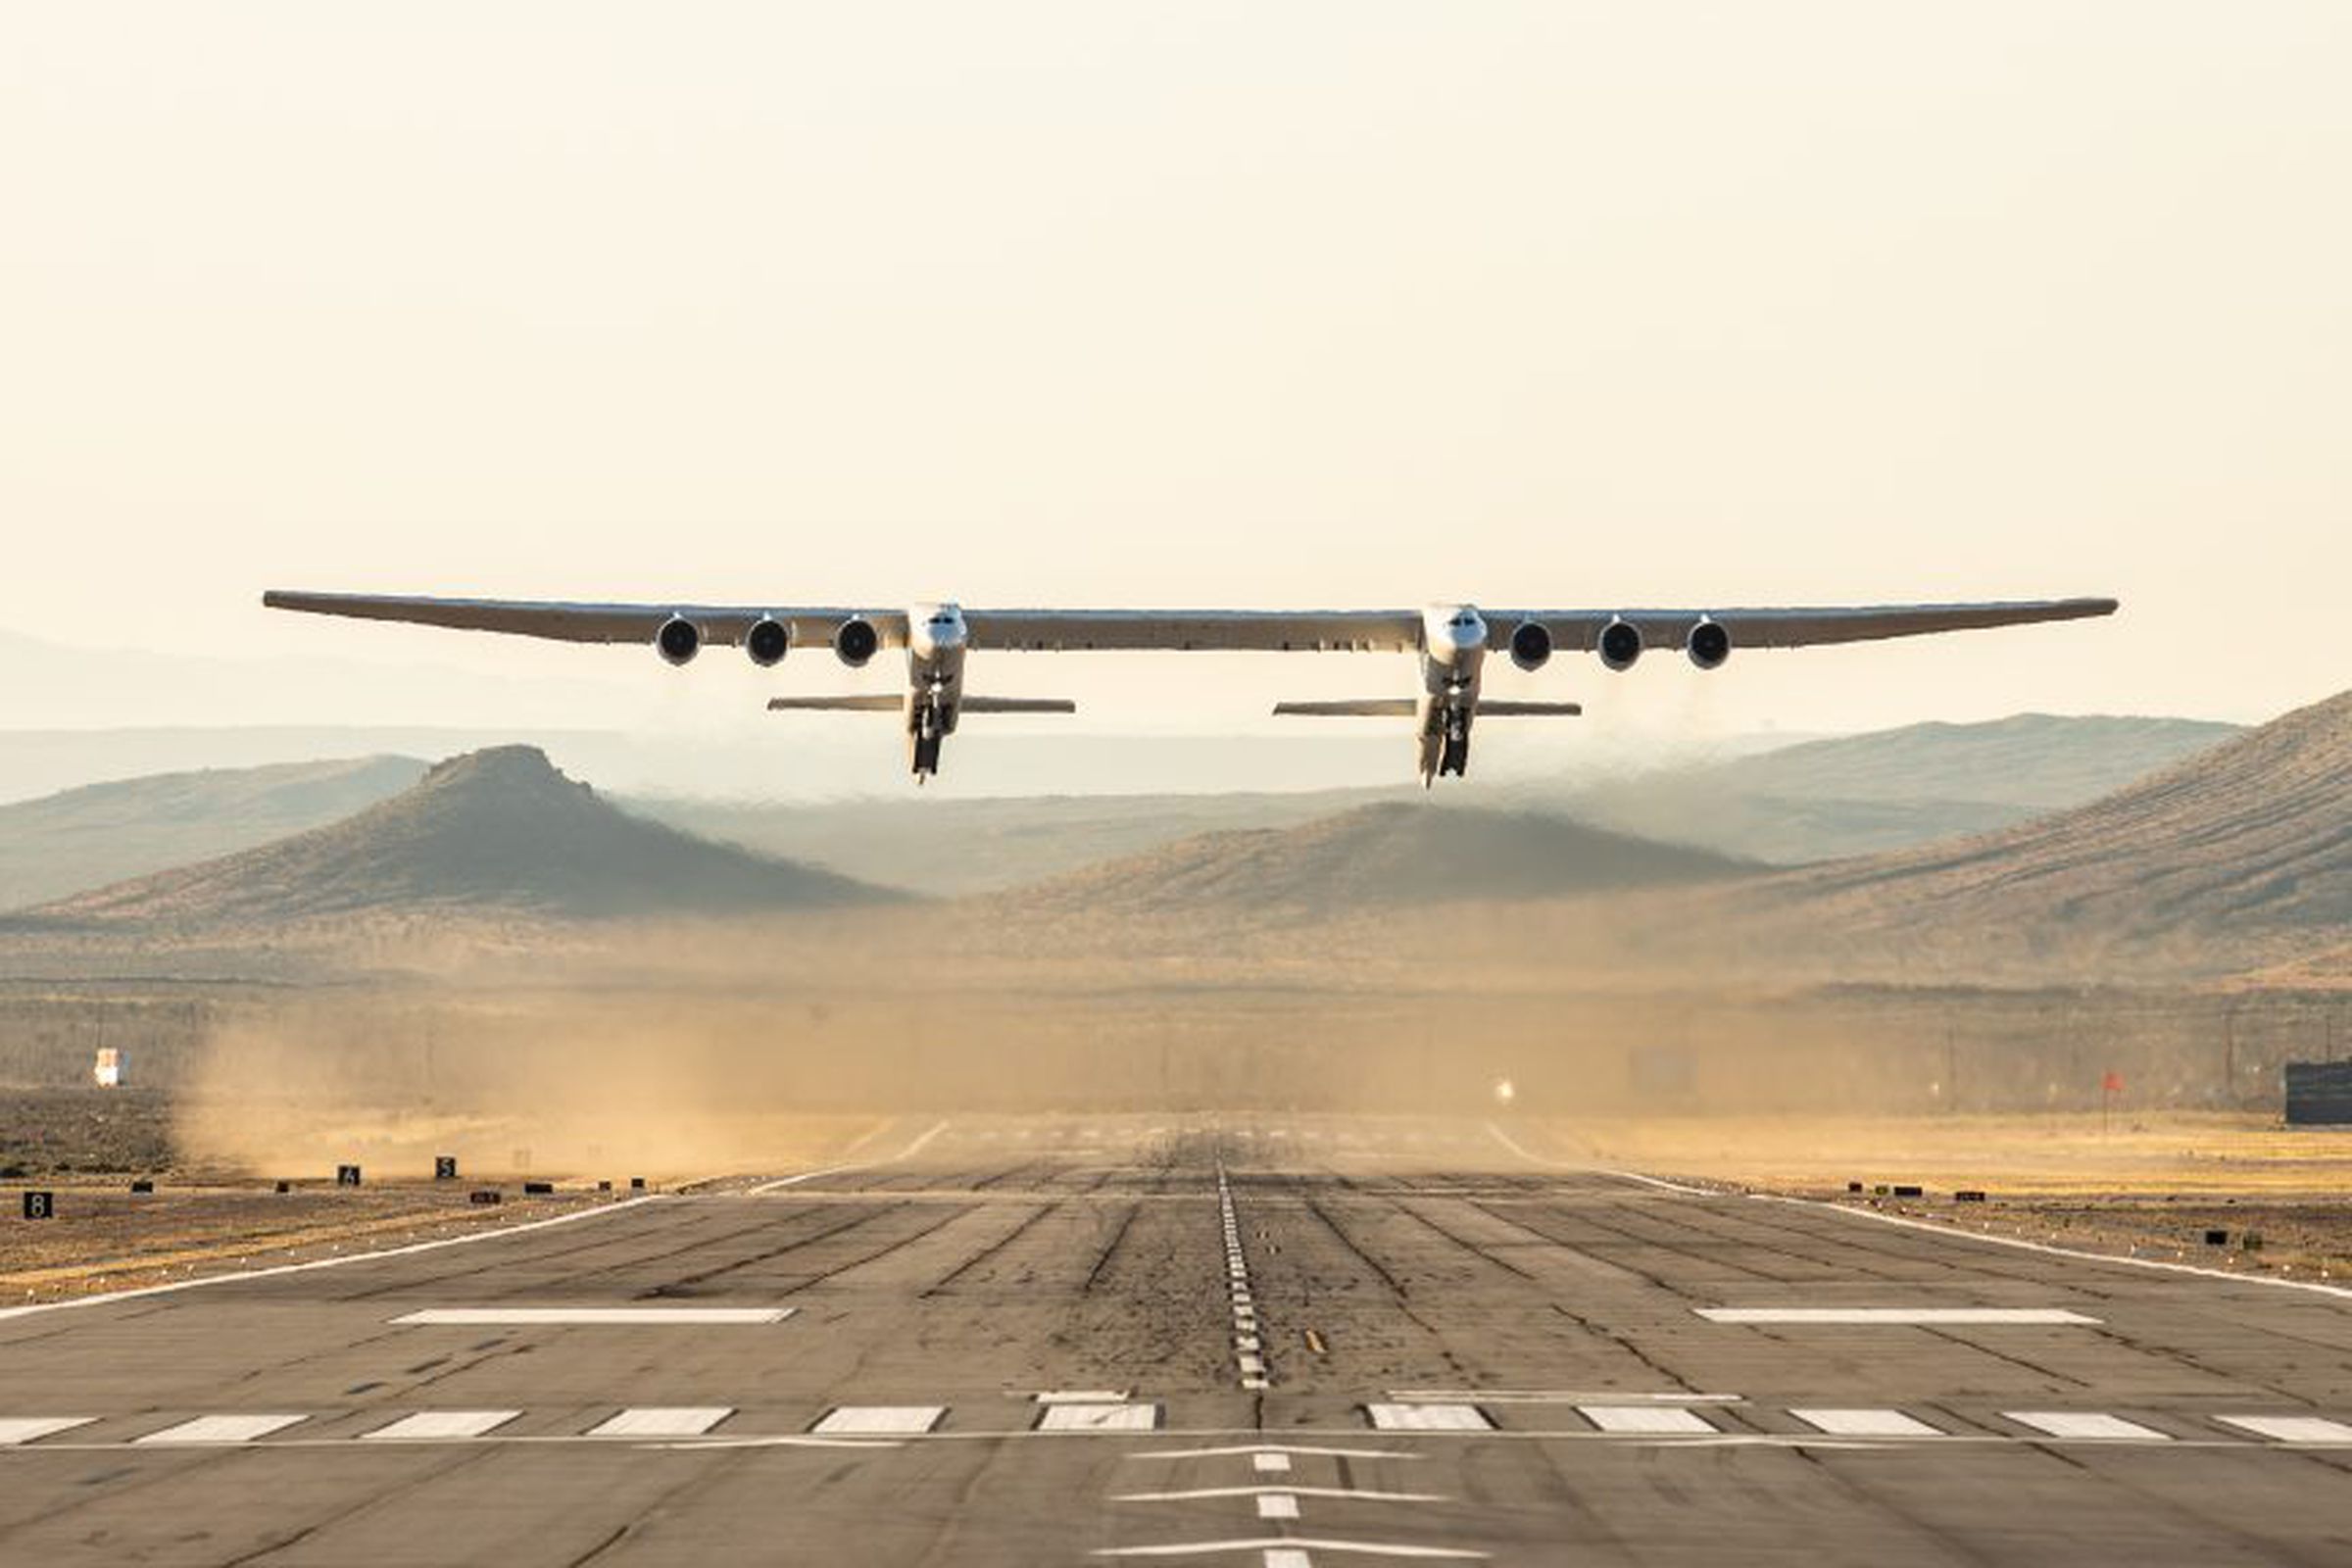 The Stratolaunch plane on its first flight